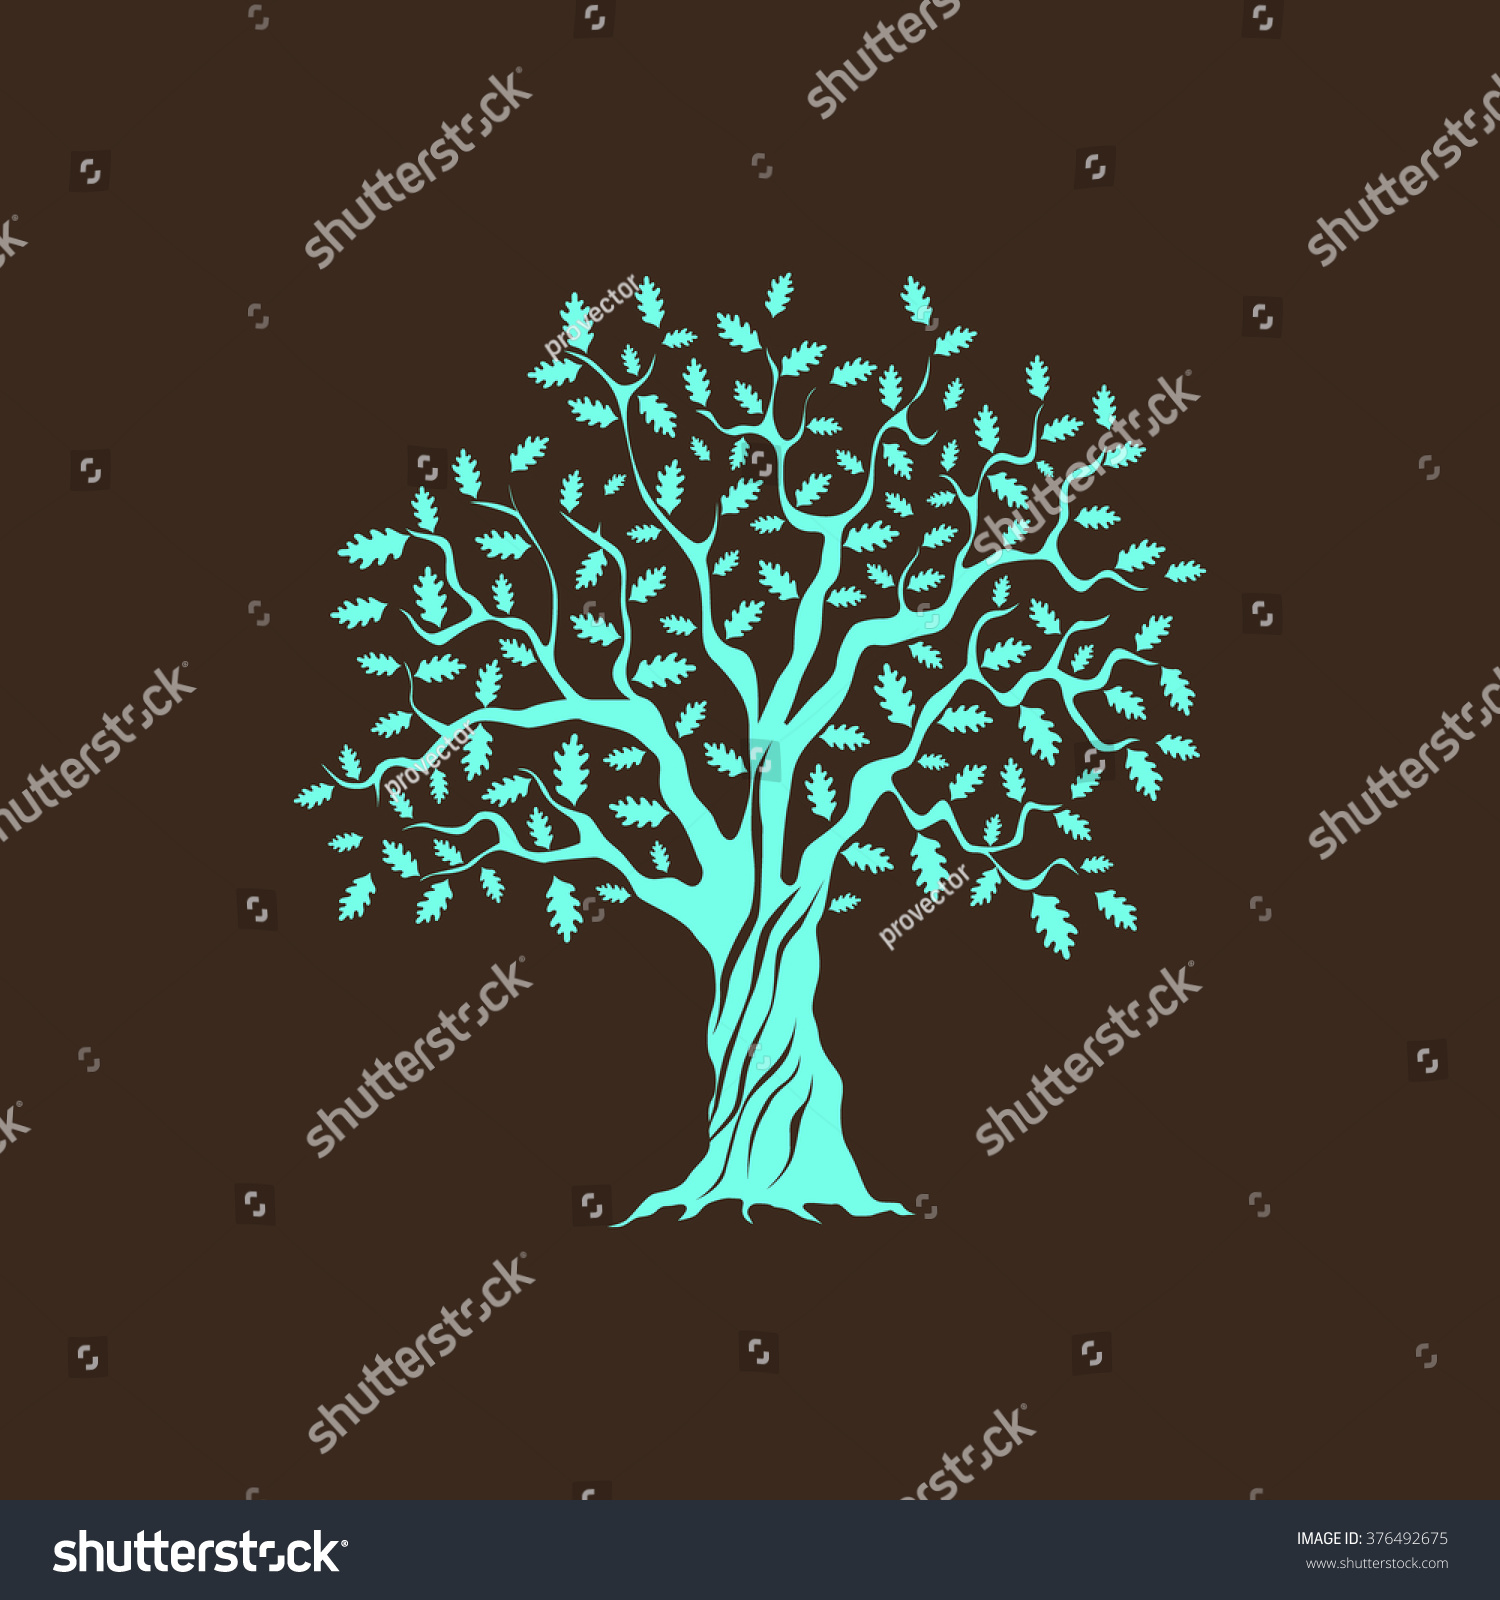 Beautiful green oak tree silhouette on brown background. Infographic modern vector sign. Premium quality illustration logo design concept. #376492675